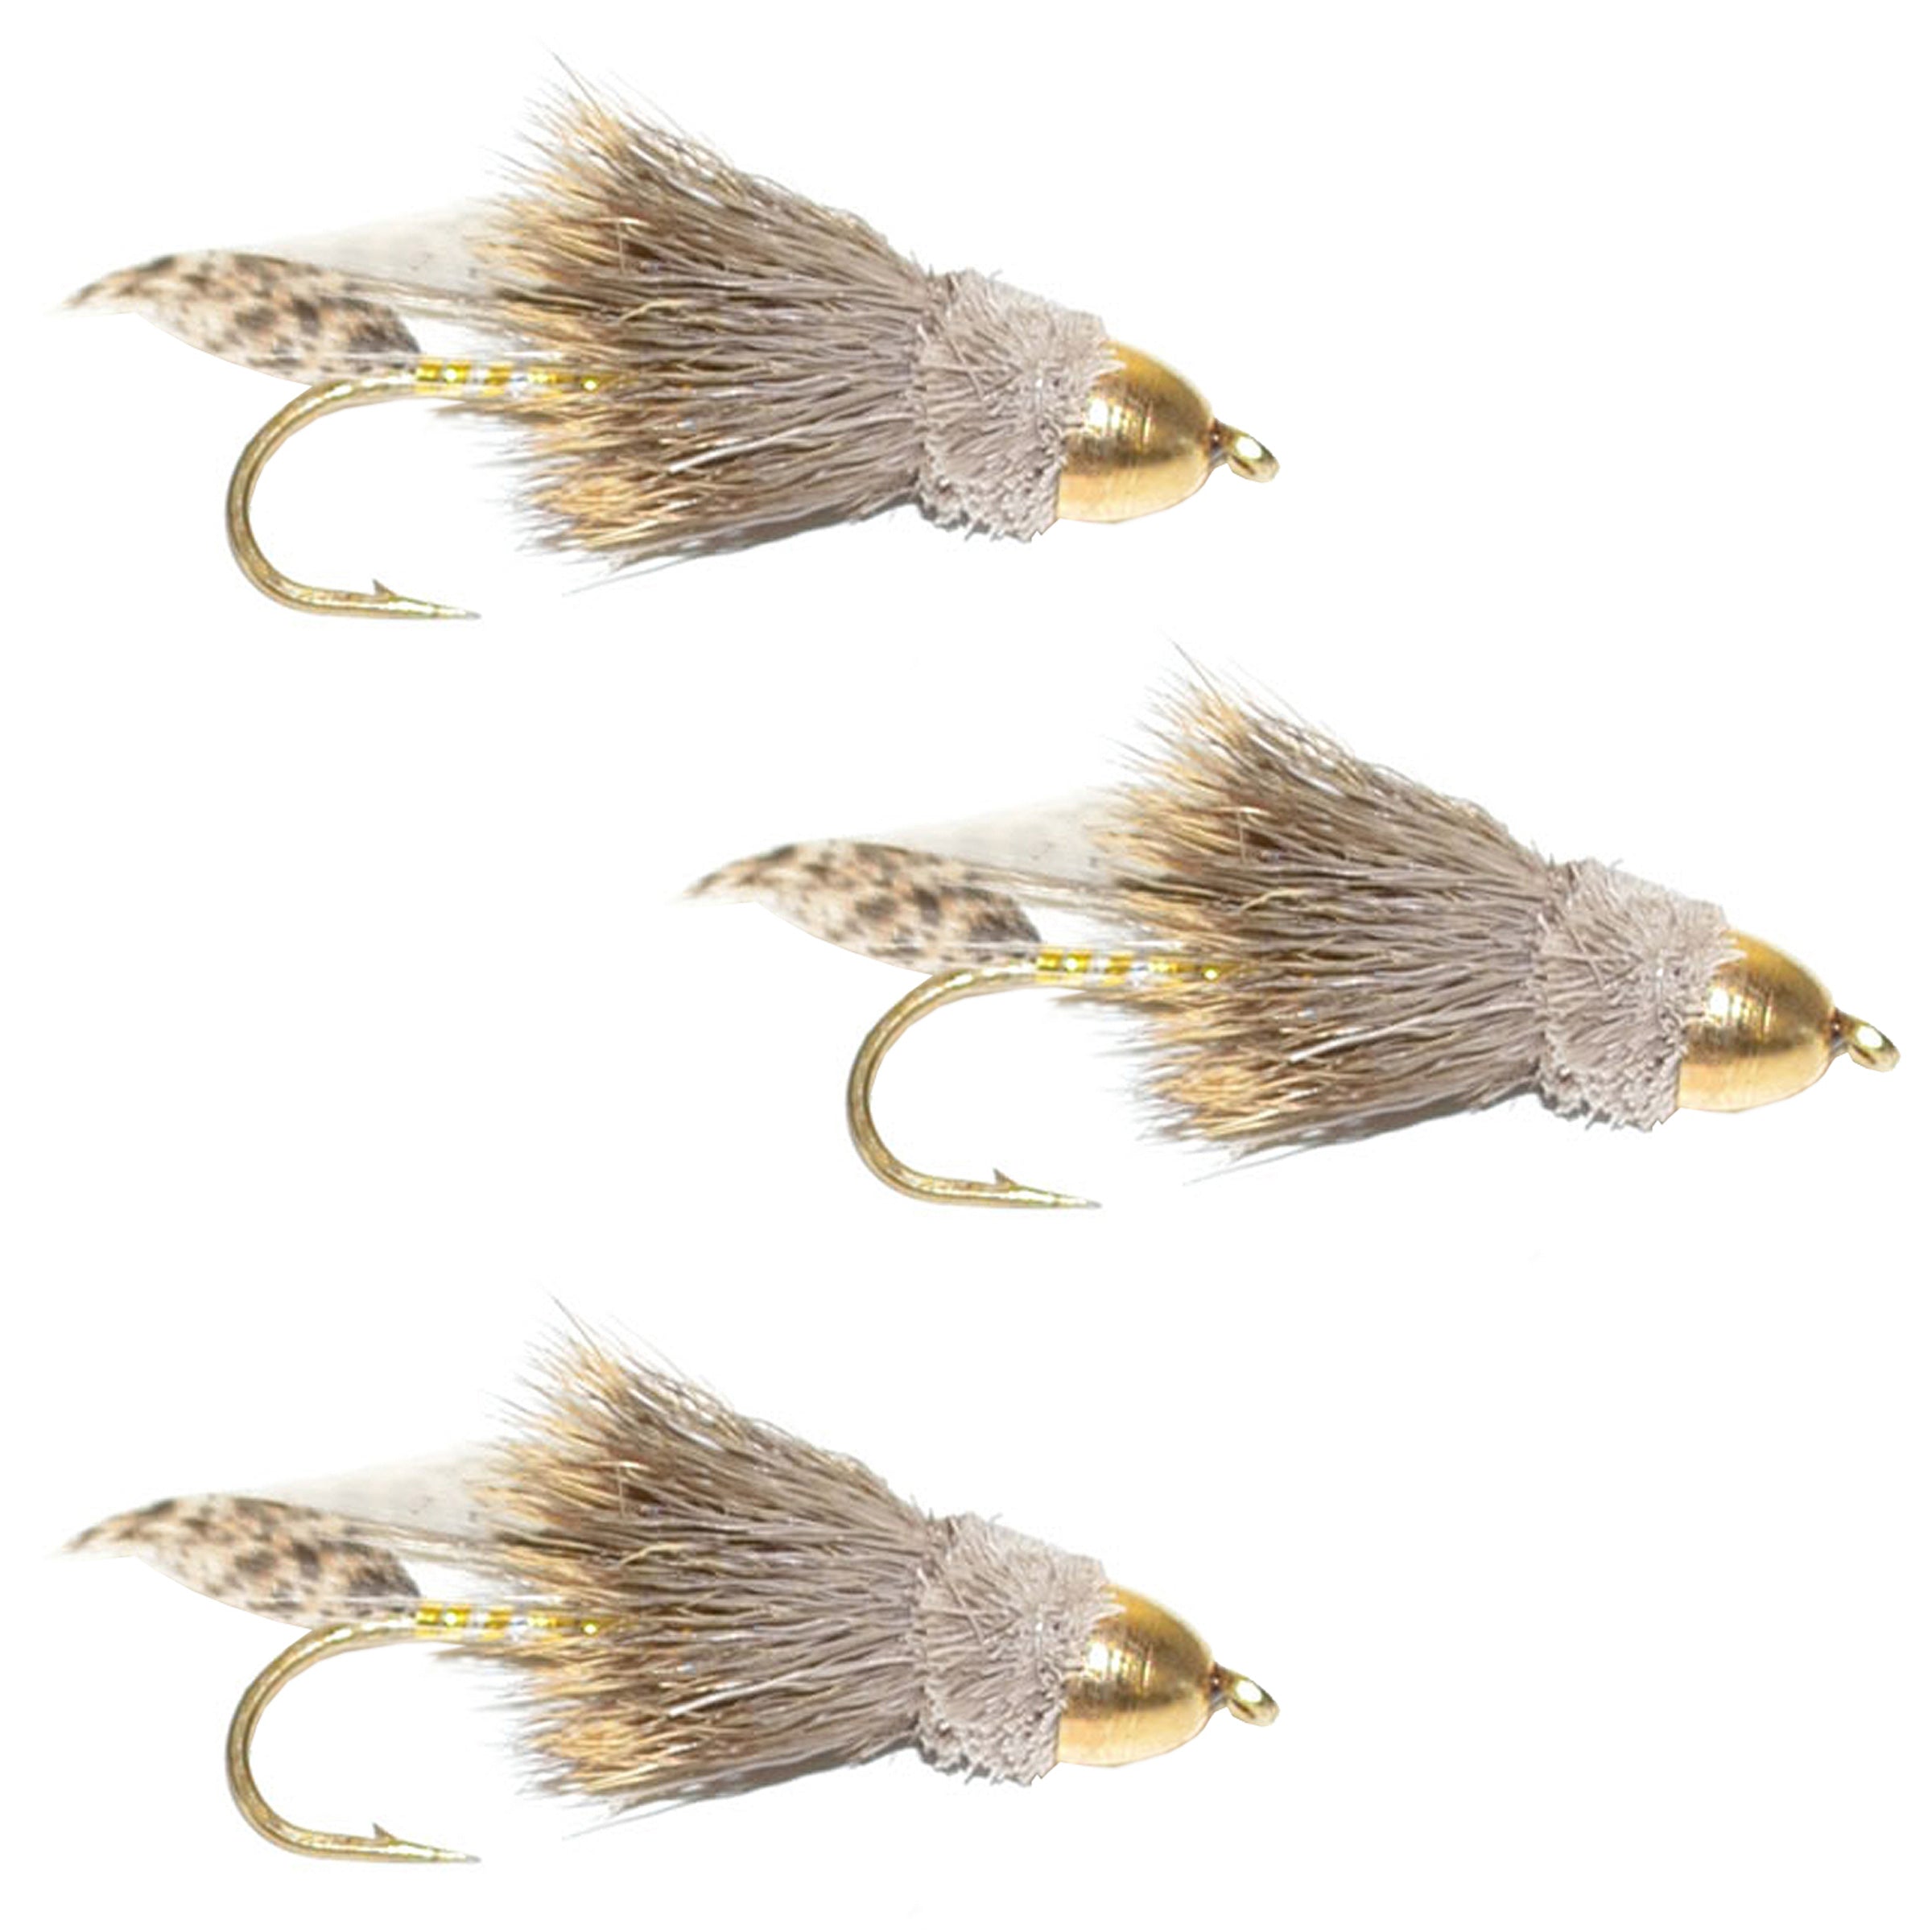 3 Pack Cone Head Muddler Minnow Trout and Bass Streamer Fly - Hook Size 2